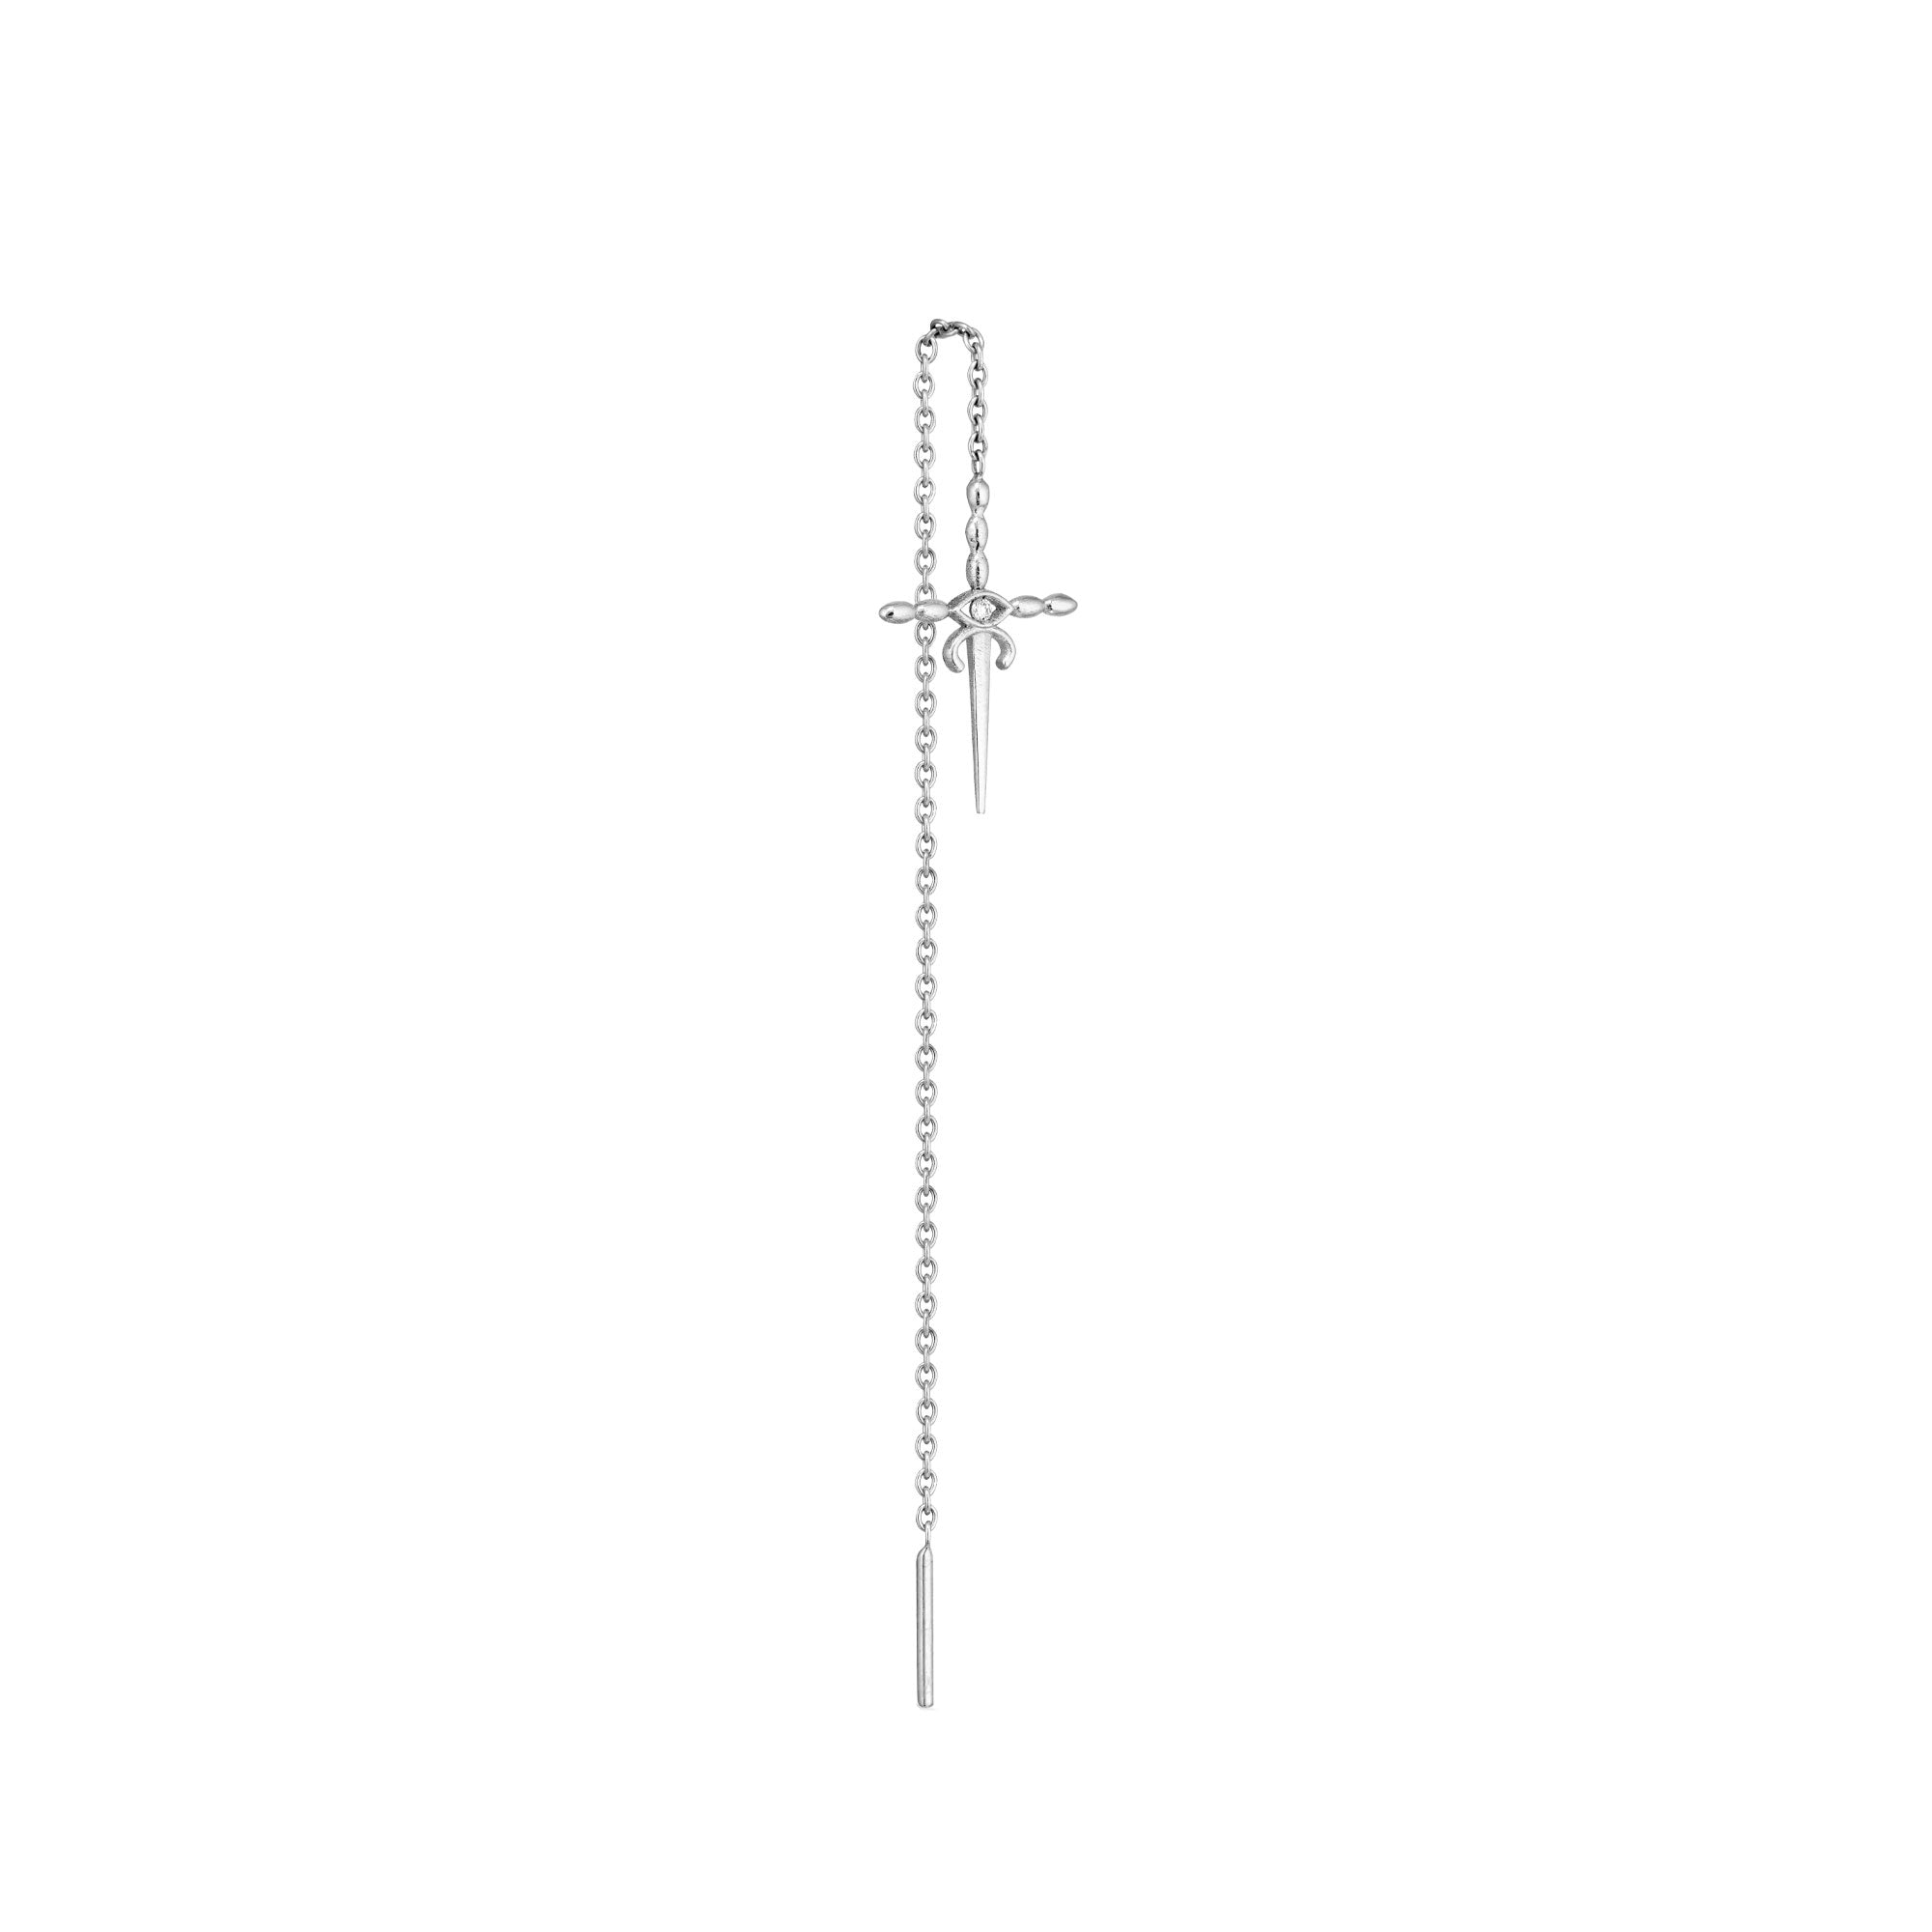 White Gold Daly Sword Earring